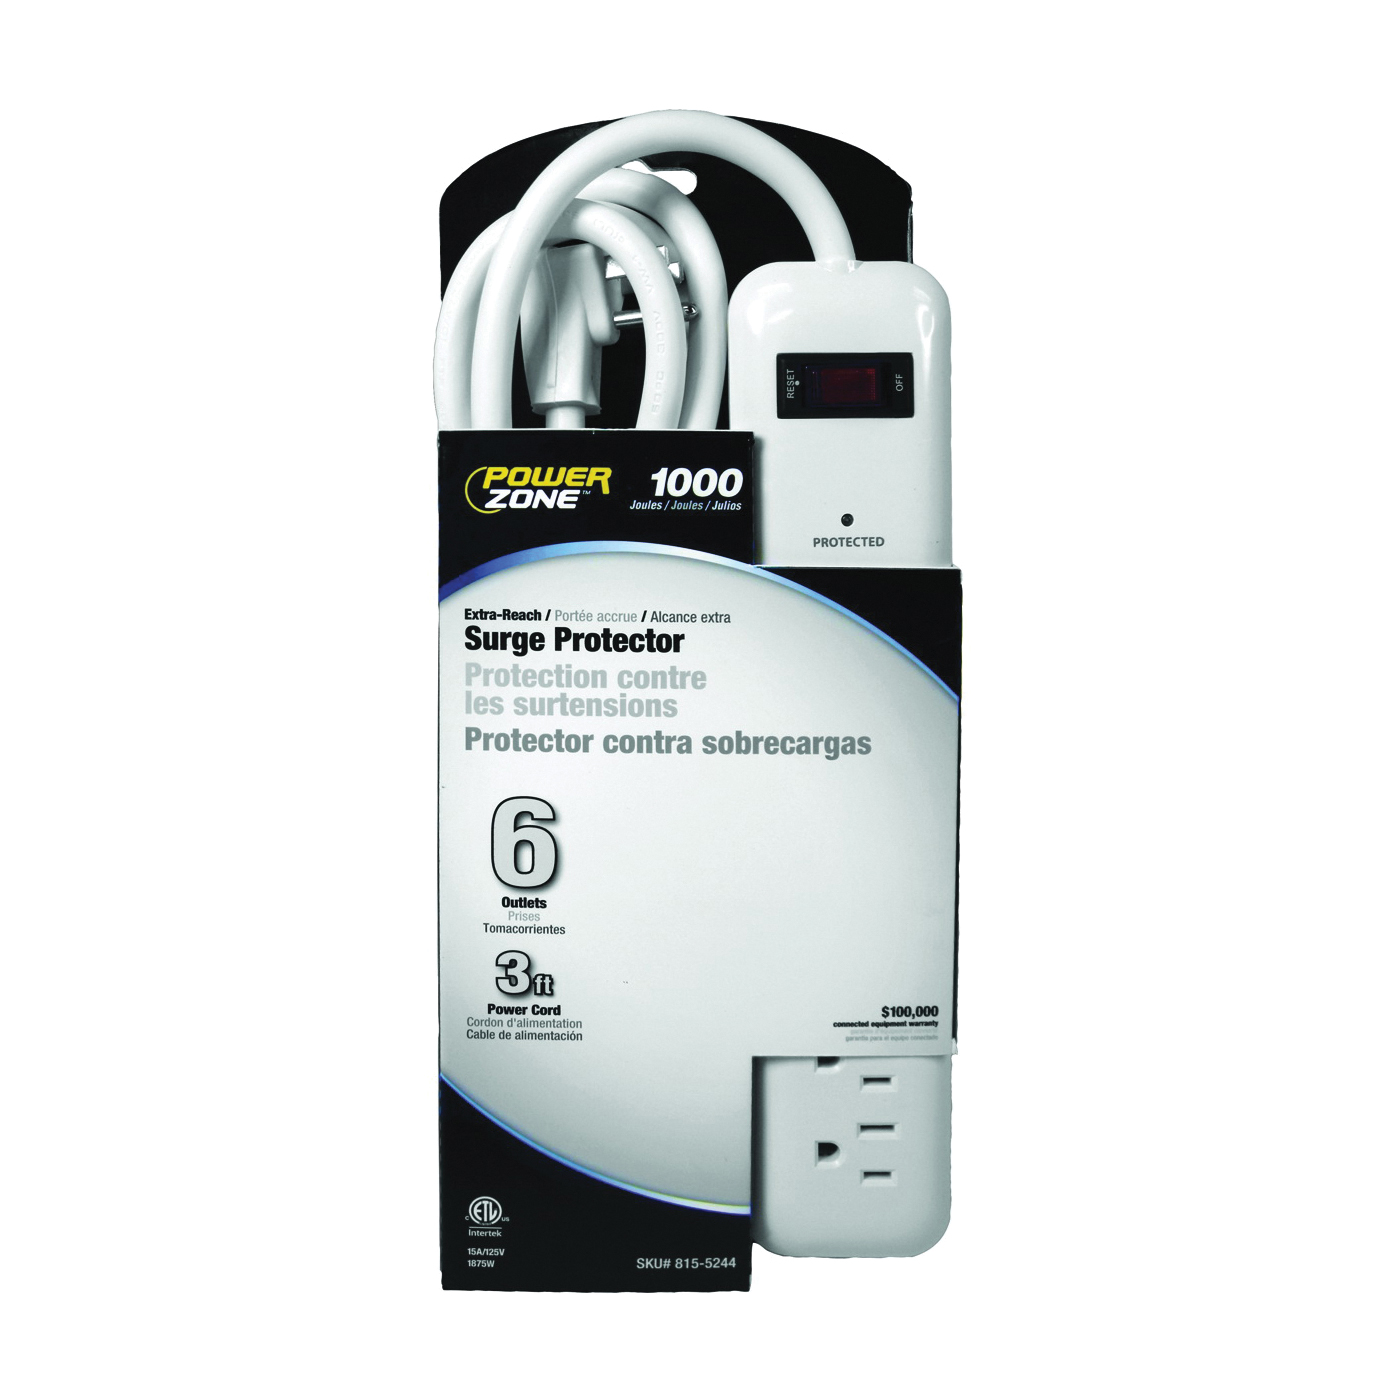 PowerZone OR802126 Surge Protector Power Strip, 125 V, 15 A, 6-Outlet, 1000 Joules Energy, White - 2